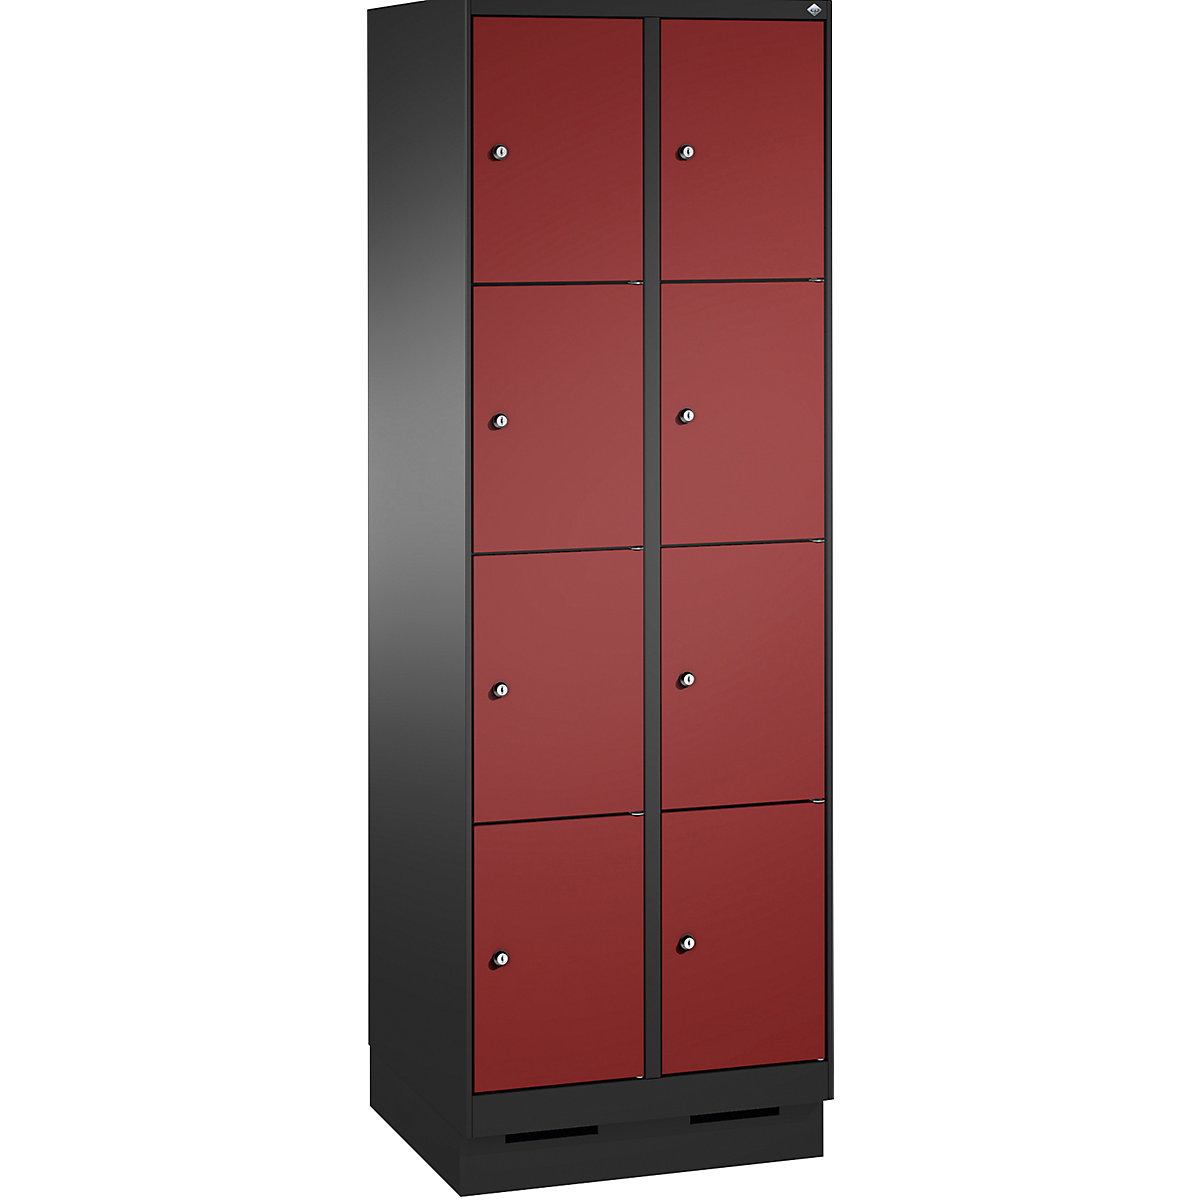 EVOLO locker unit, with plinth – C+P, 2 compartments, 4 shelf compartments each, compartment width 300 mm, black grey / ruby red-3